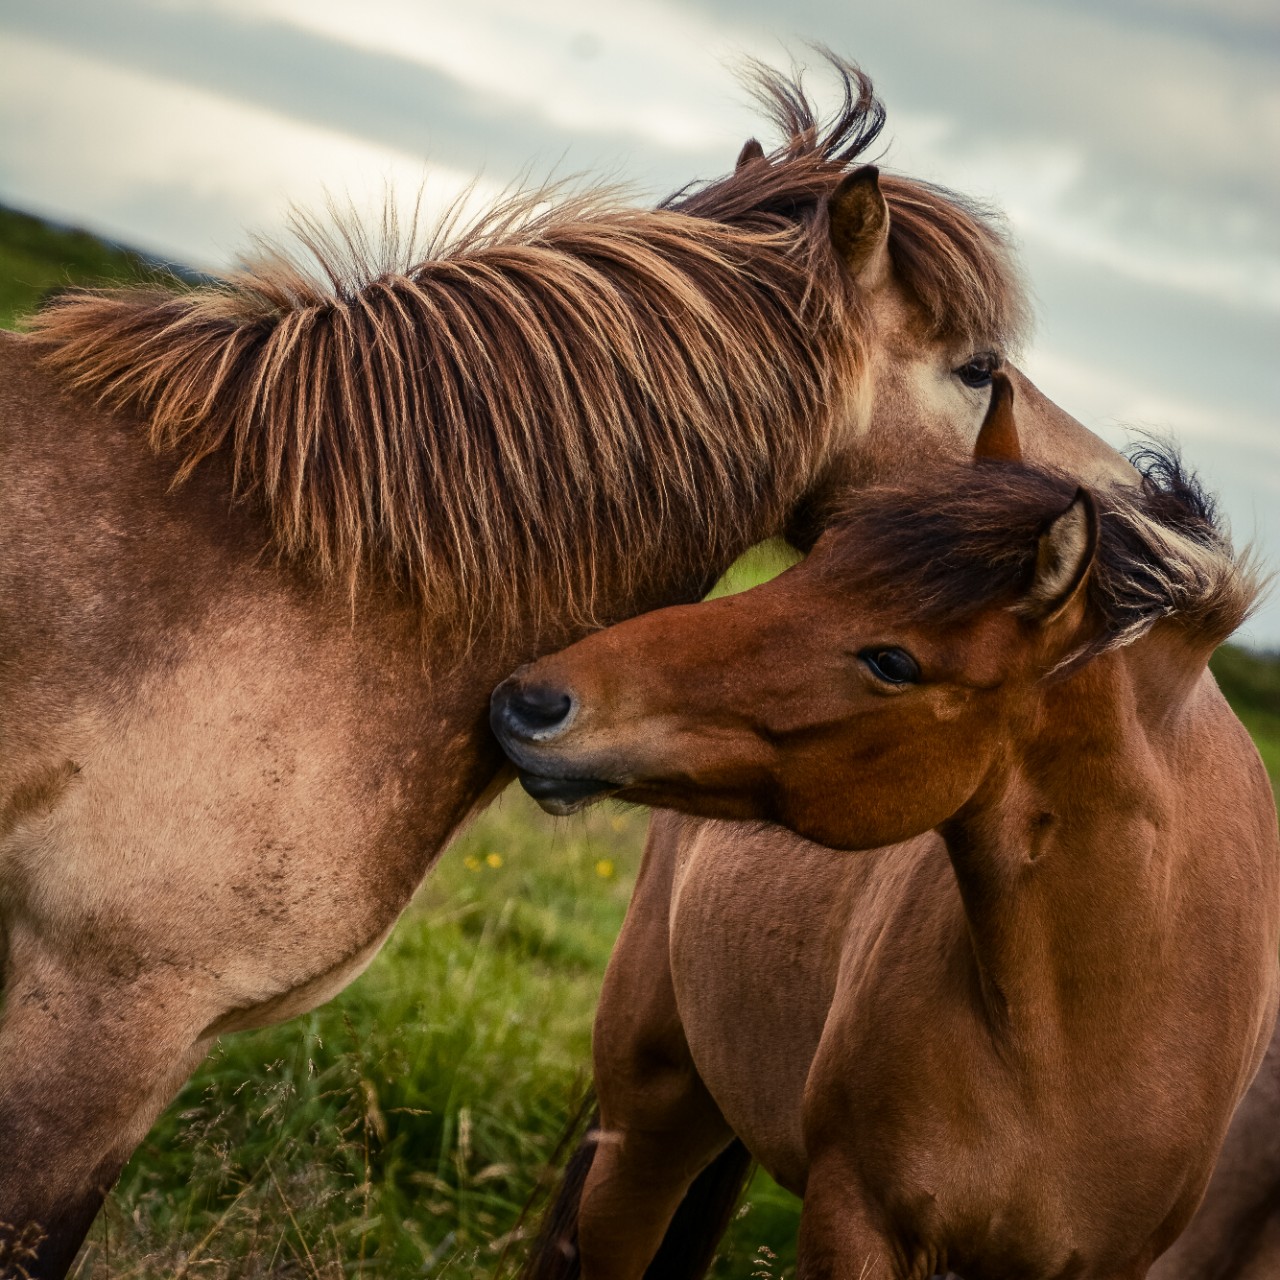 The photo shows two brown beautiful horses in a green meadow on a cloudy day nuzzling one another’s necks and manes.